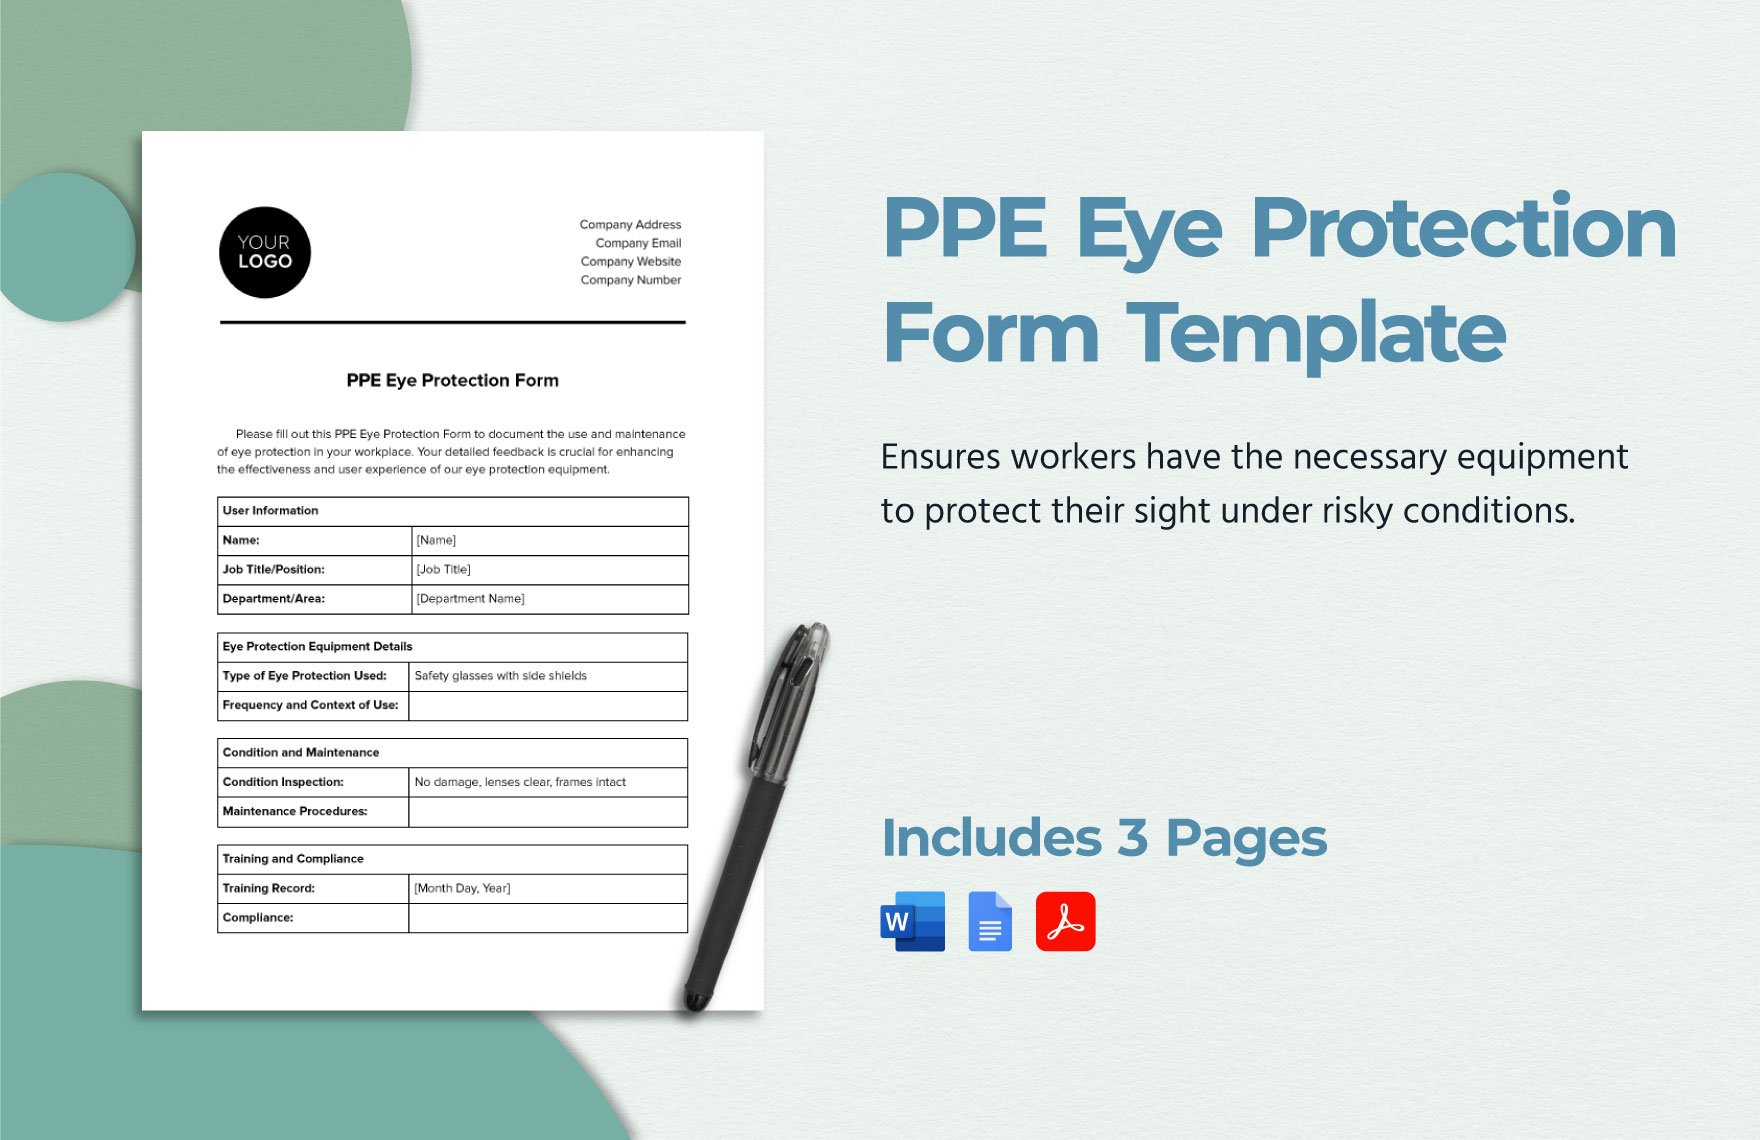 PPE Eye Protection Form Template